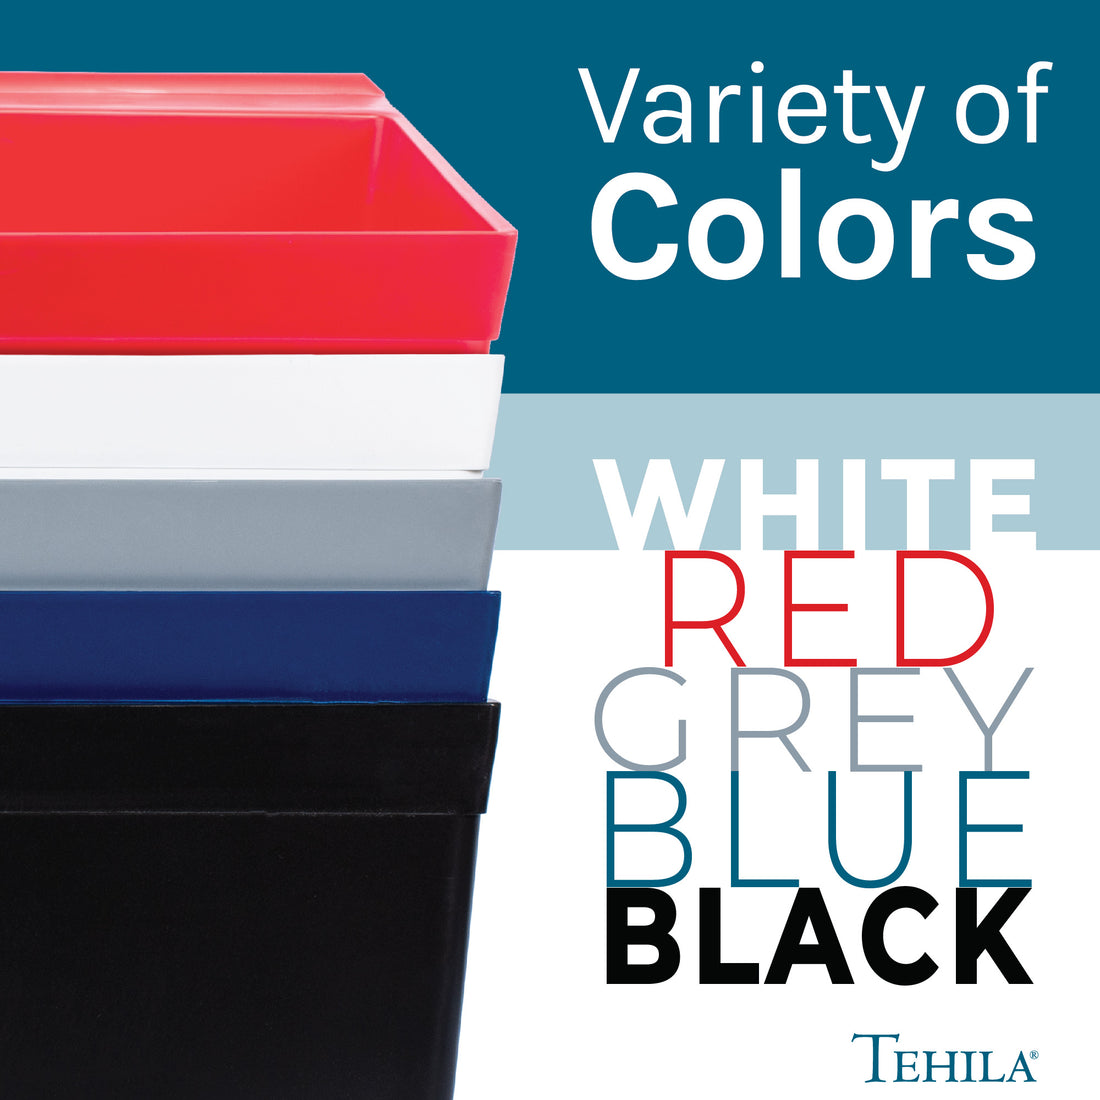 Black Standard Utility Sinks with the Variety of Colors White | Red | Grey | Blue | Black